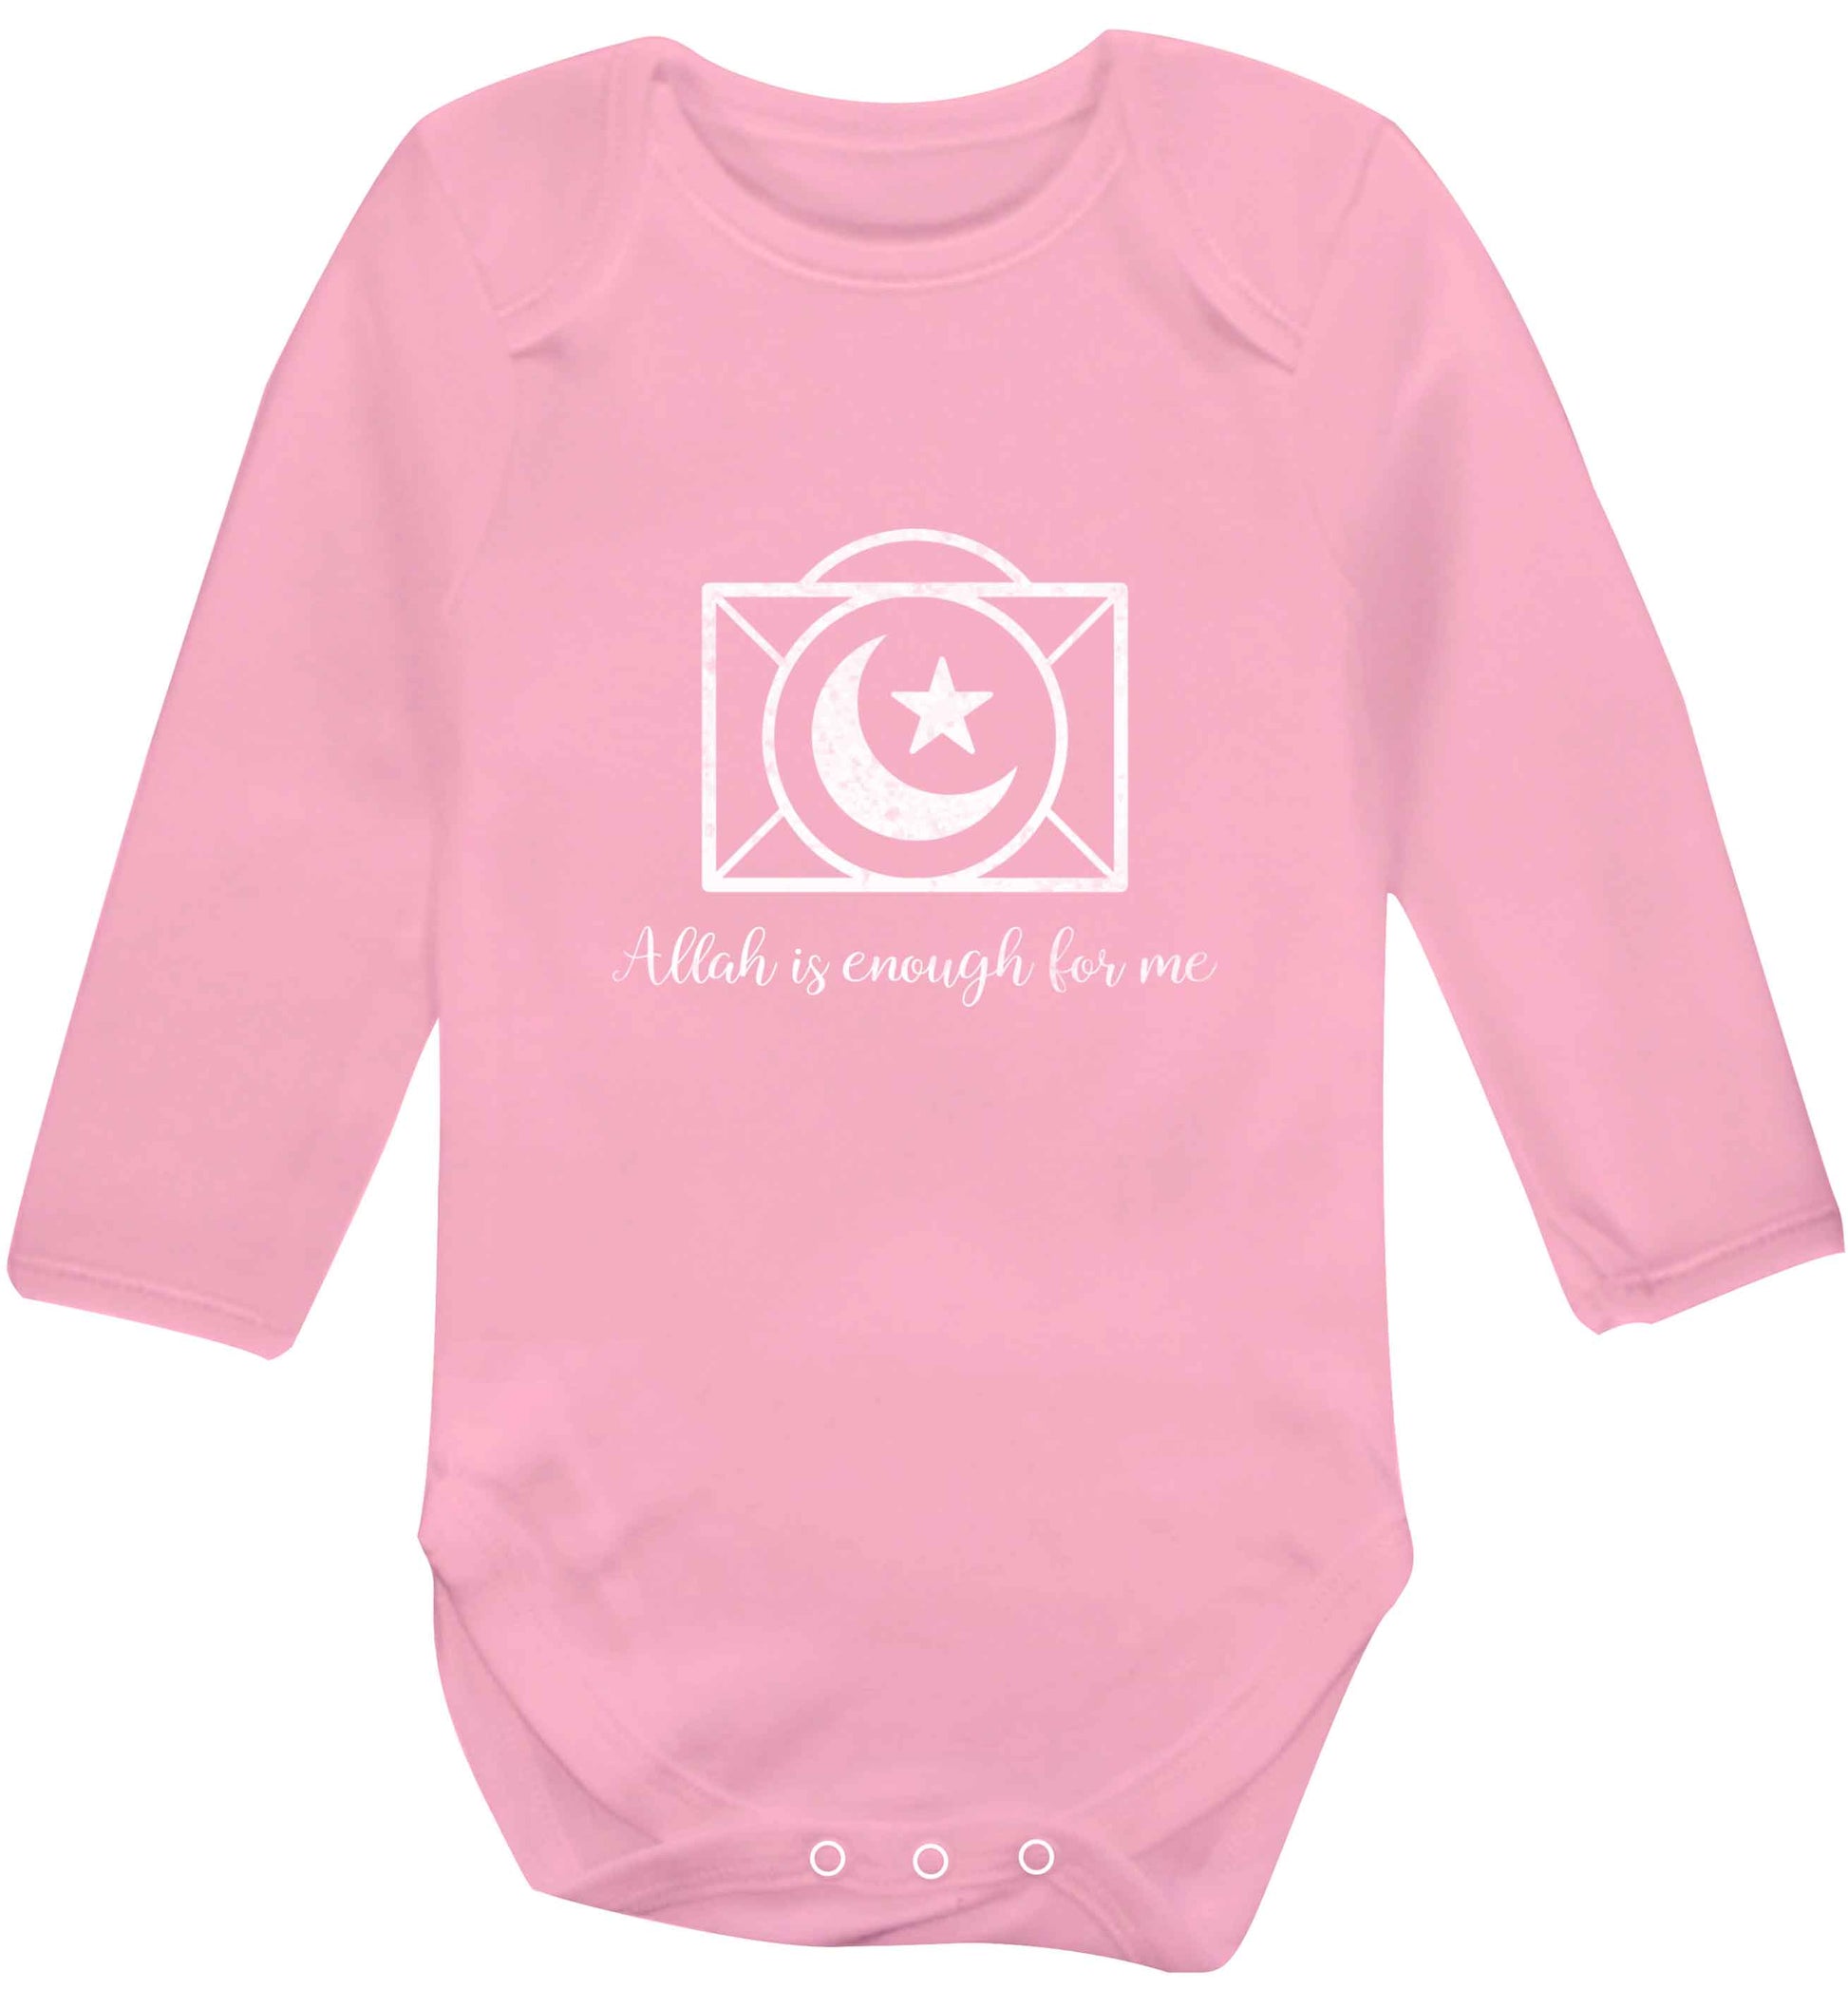 Allah is enough for me baby vest long sleeved pale pink 0-3 months